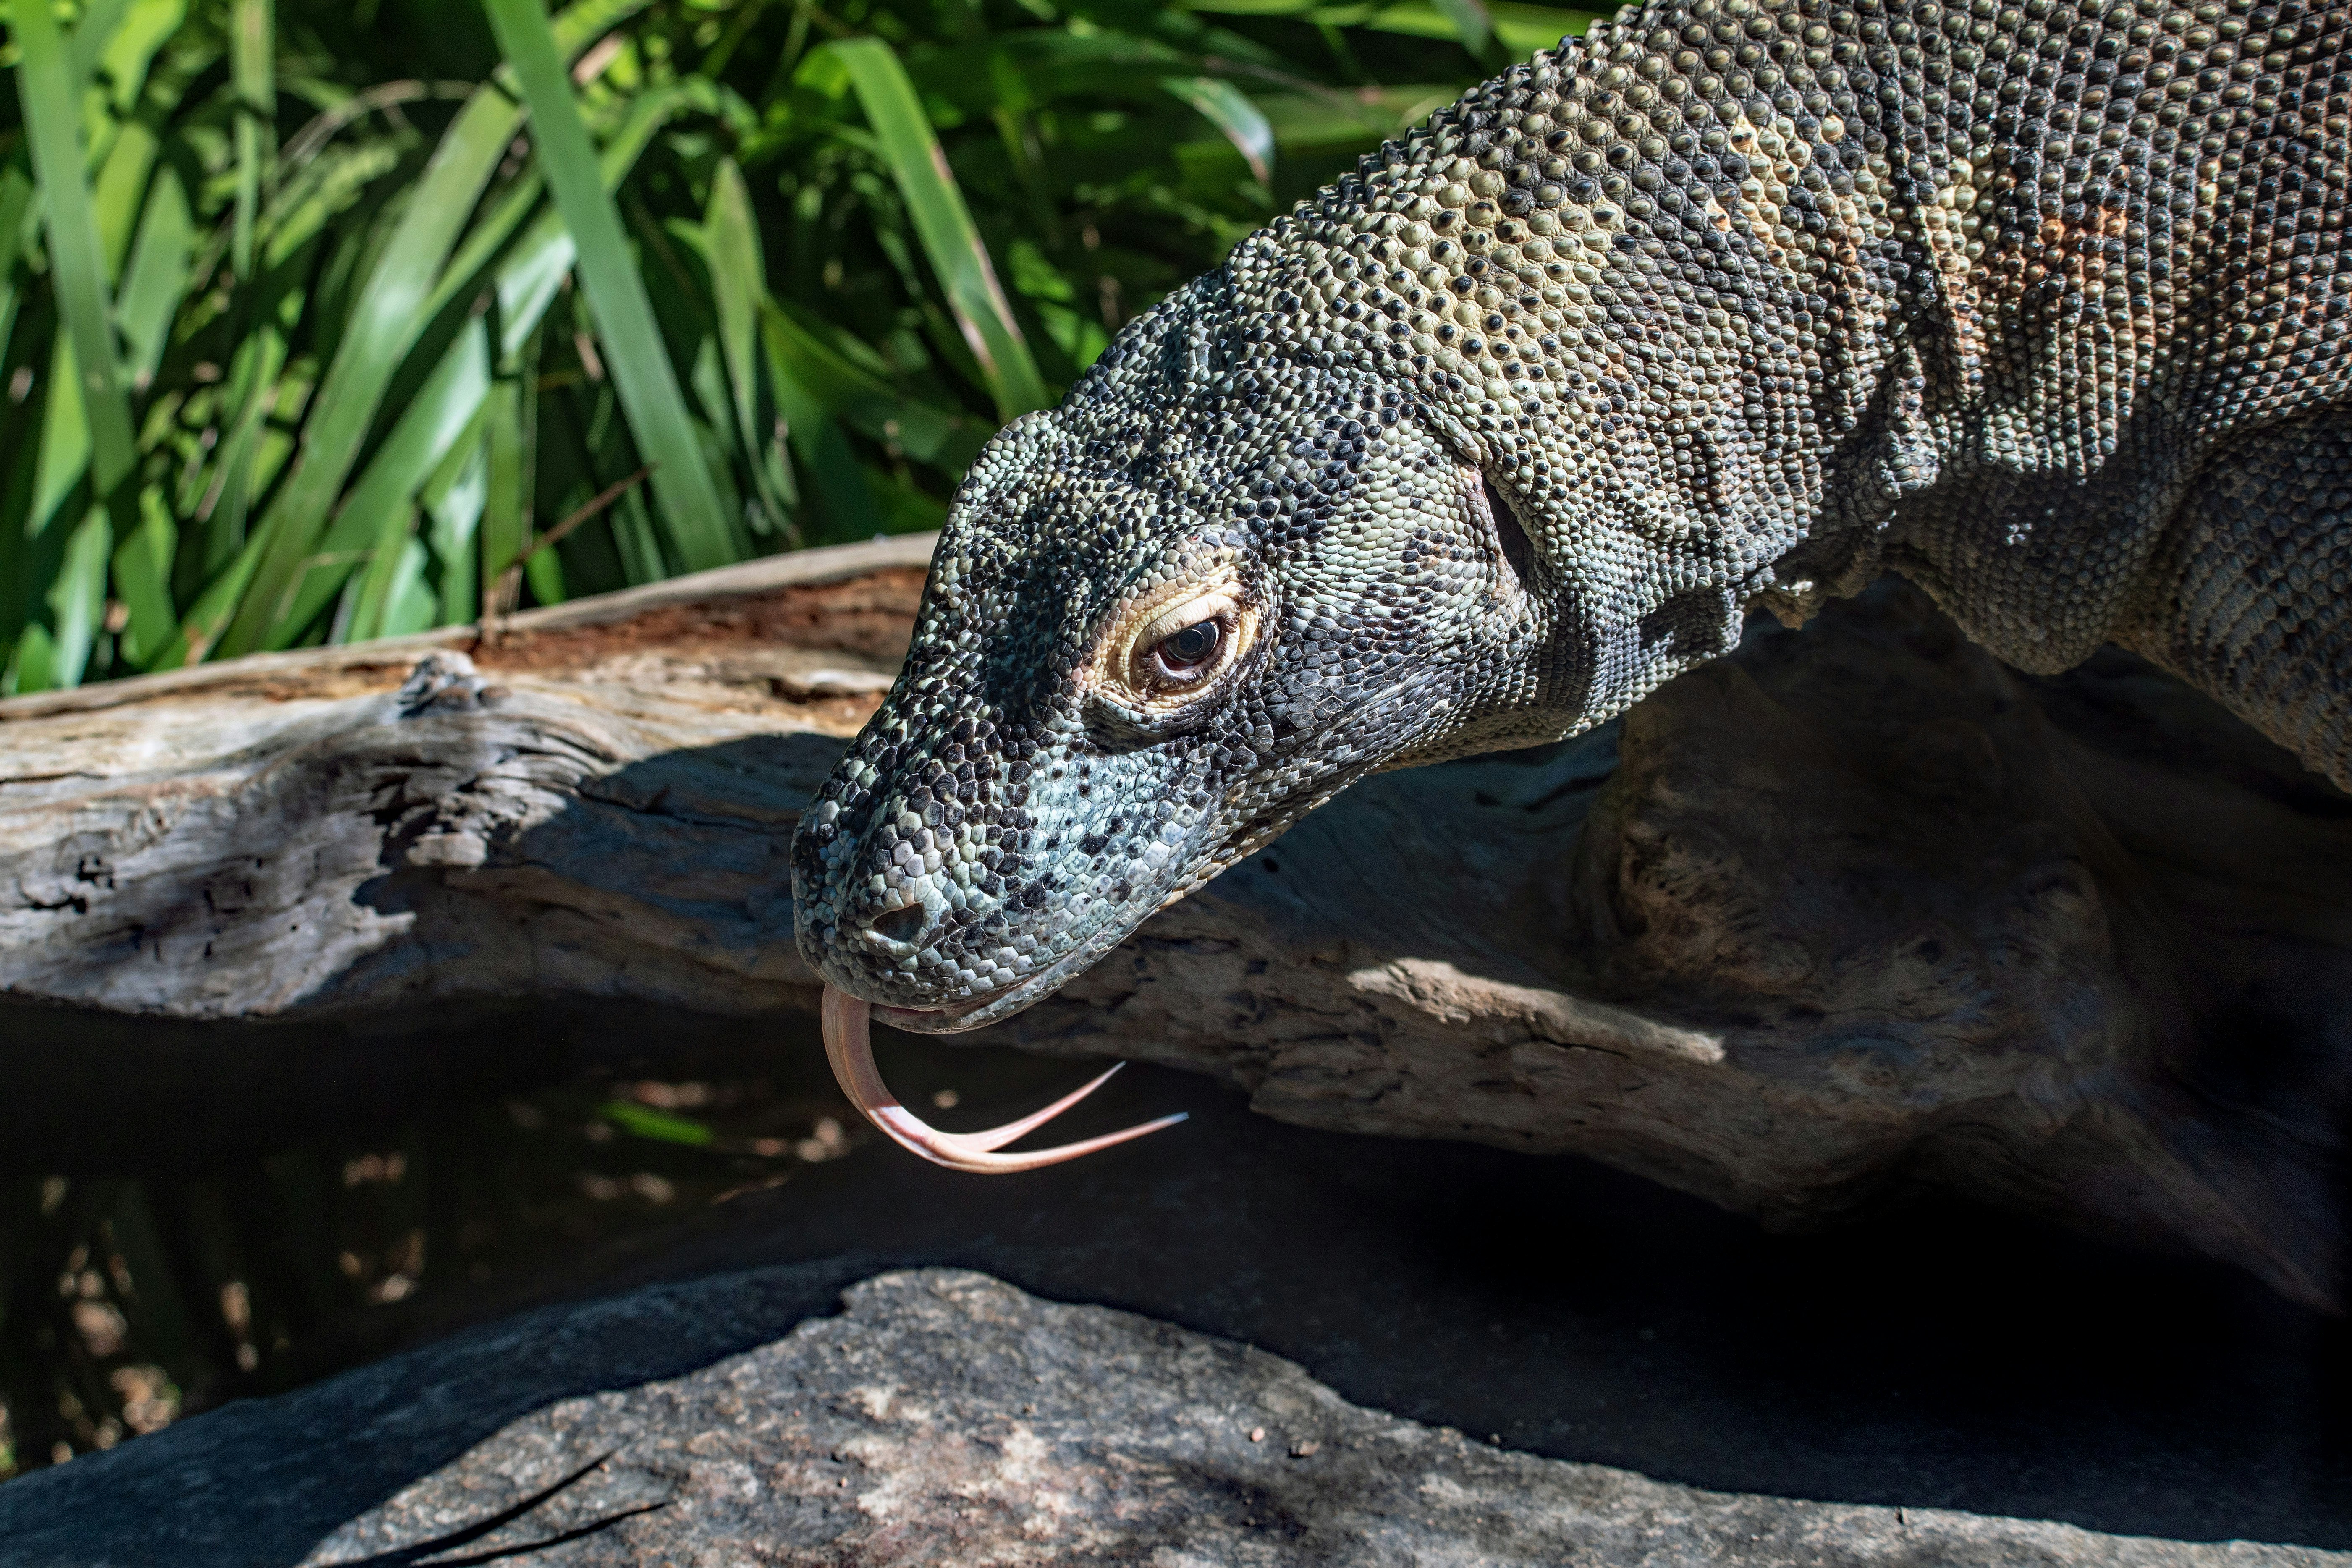 A Komodo Dragon smelling with its tongue.